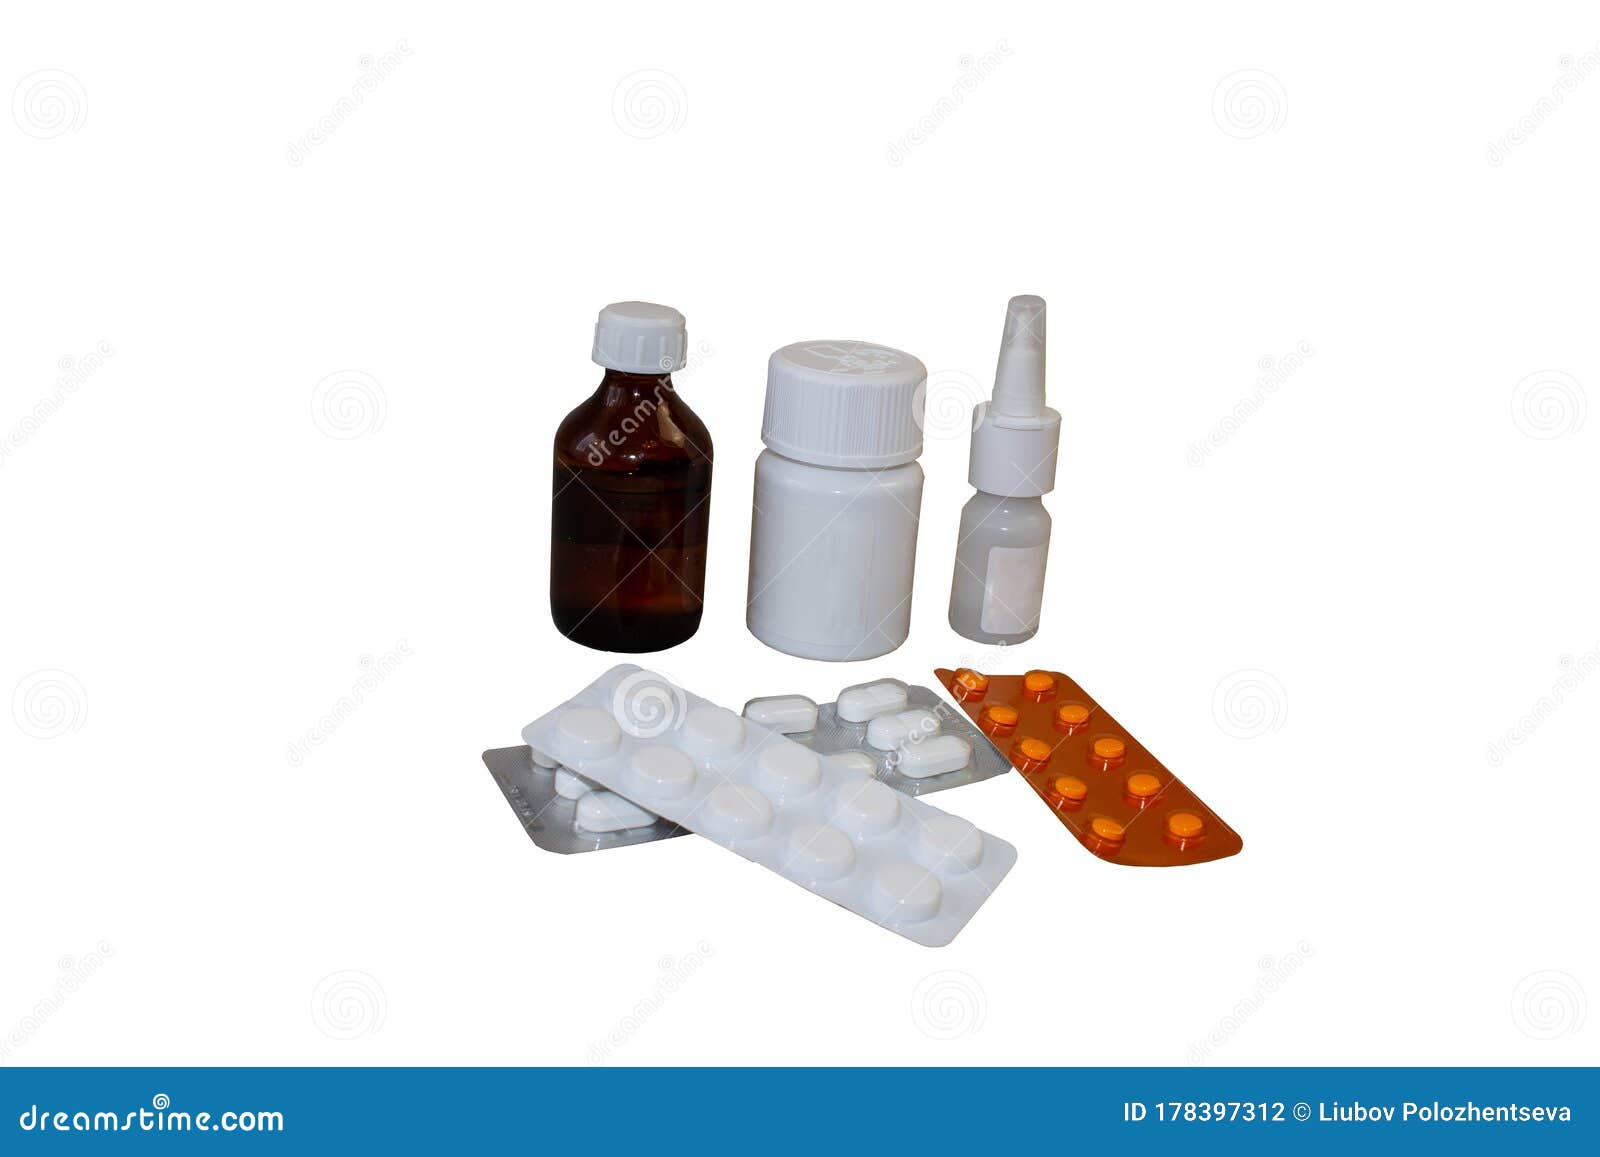 photo cut out tablets, drugs on a white background, 